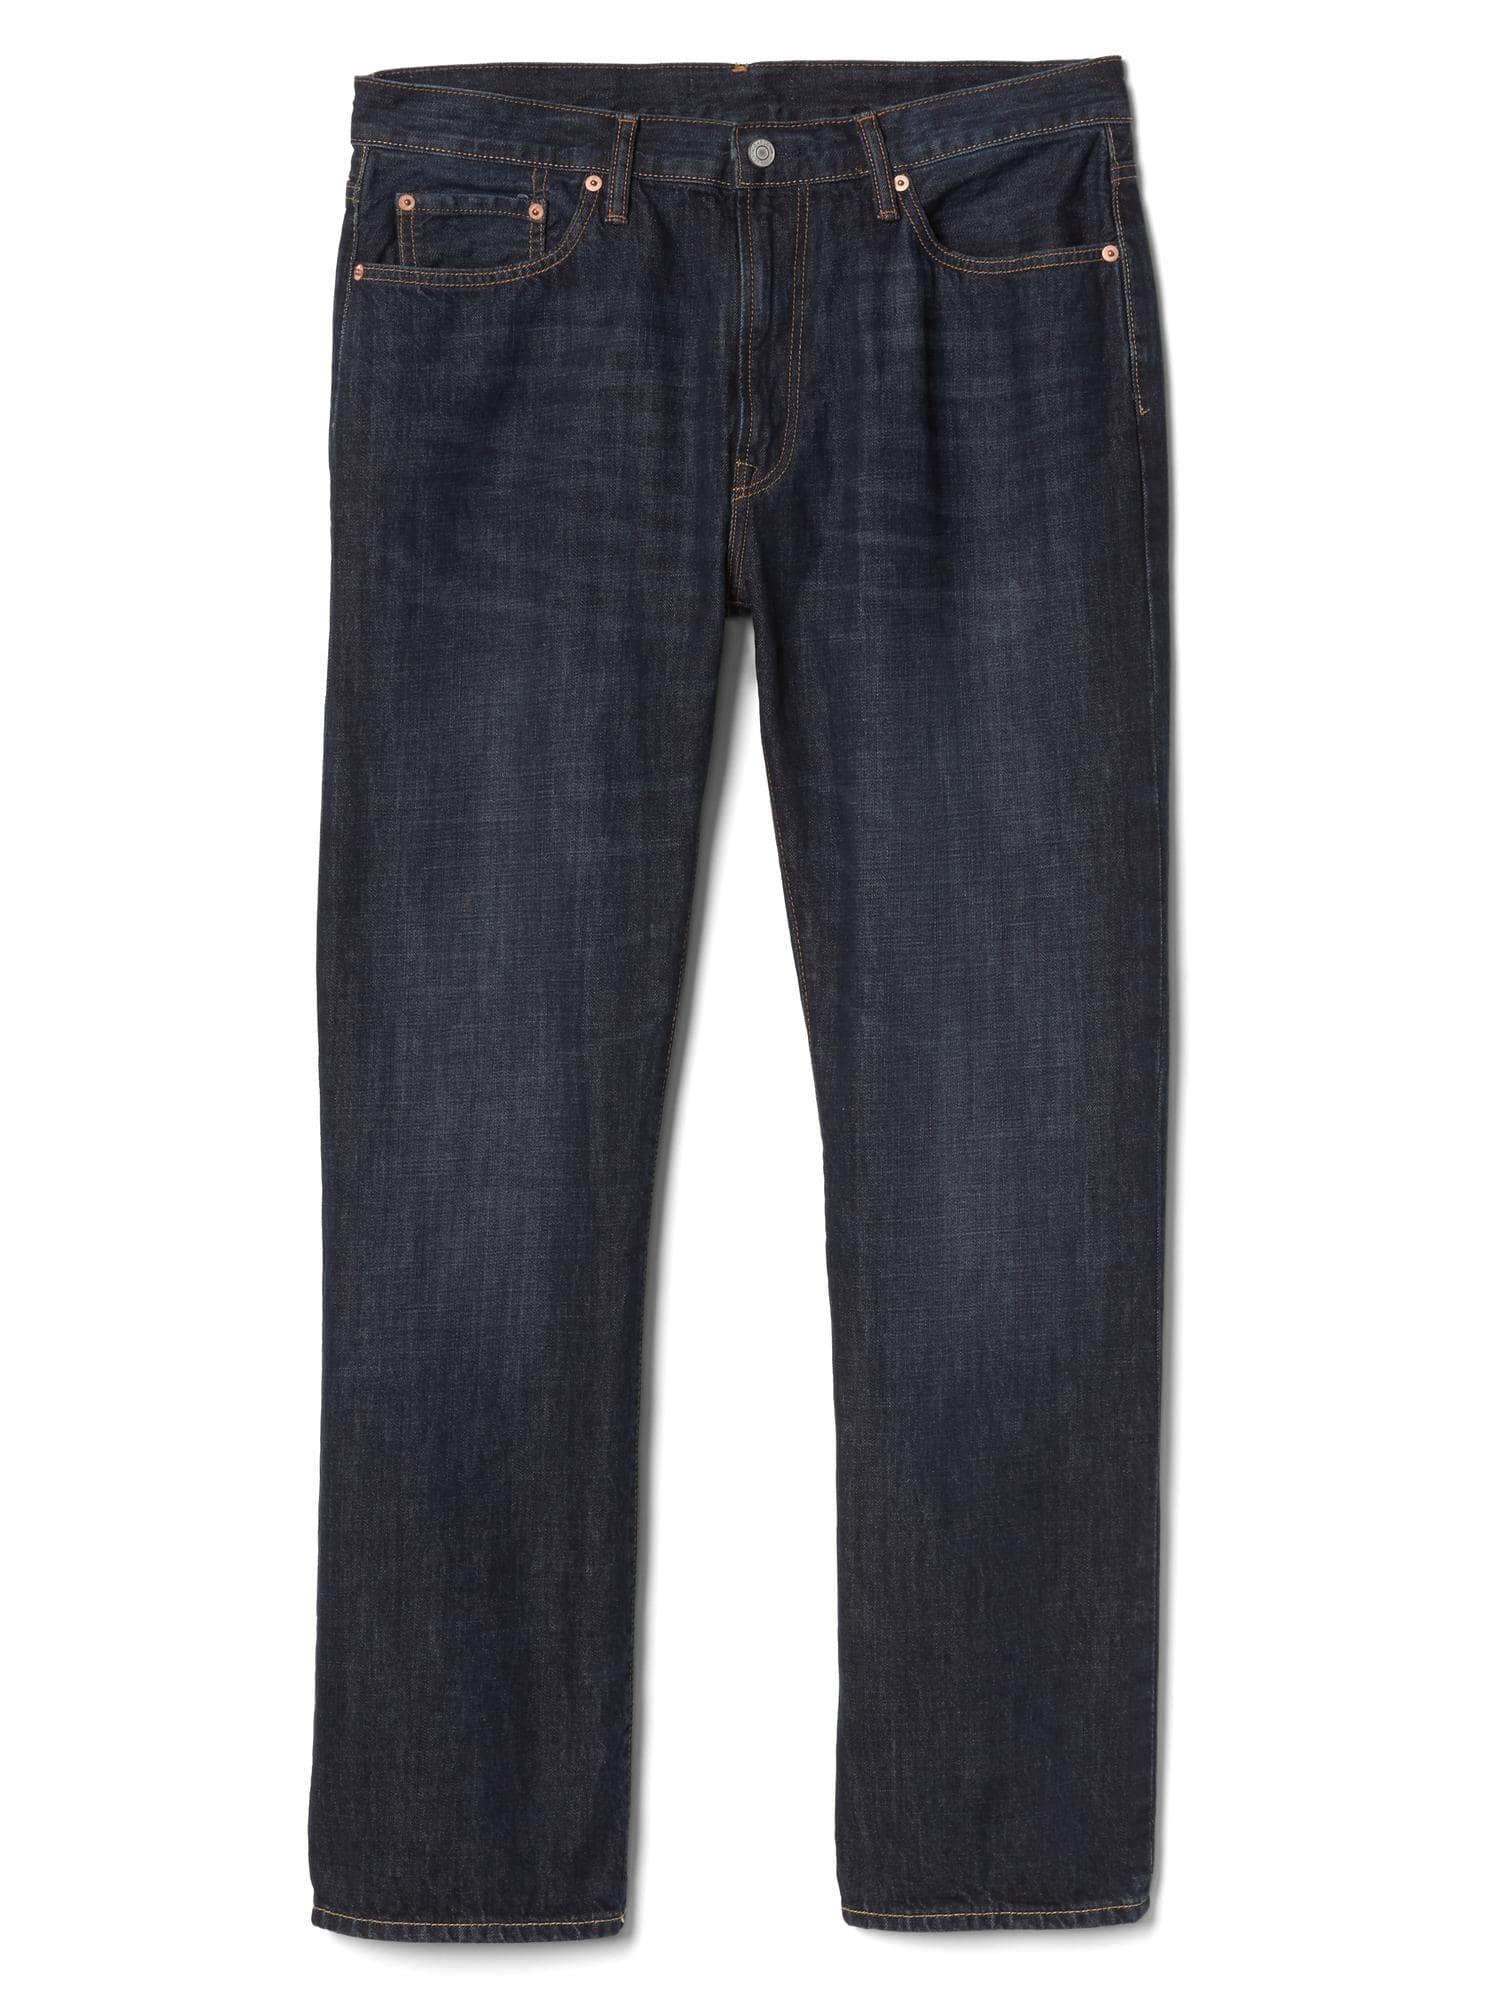 Lyst Gap Relaxed Fit Jeans In Blue For Men 0204